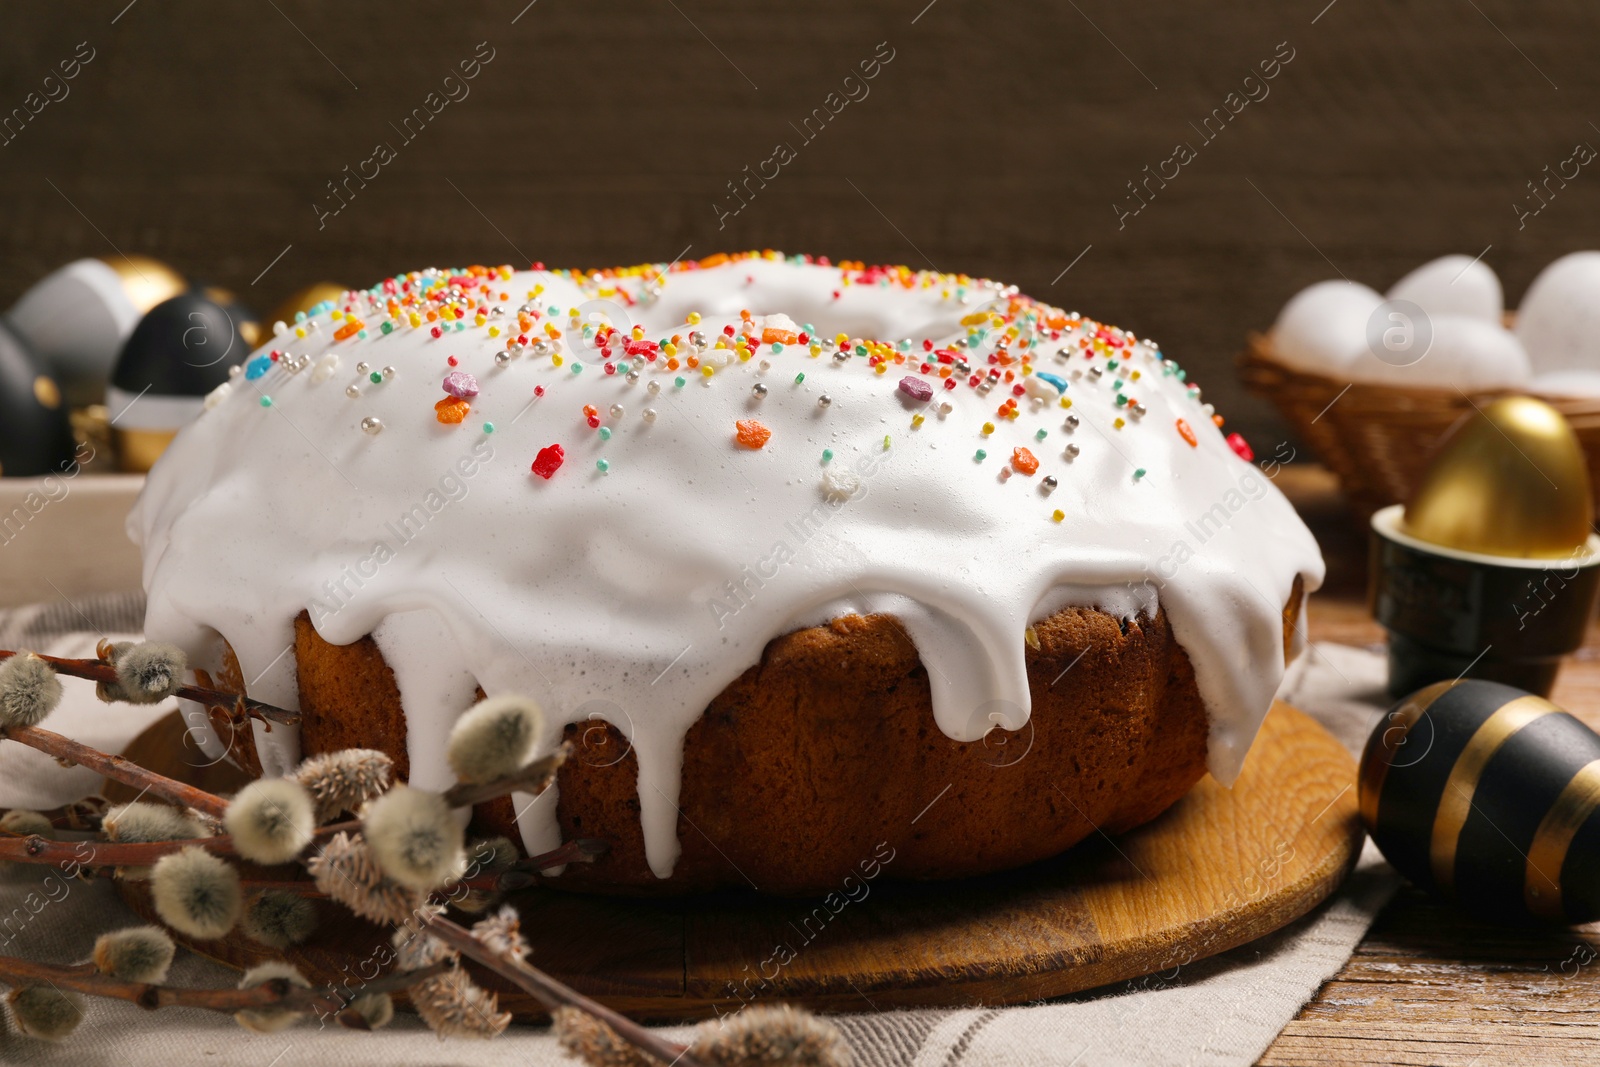 Photo of Delicious Easter cake decorated with sprinkles near eggs and willow branches on wooden table, closeup